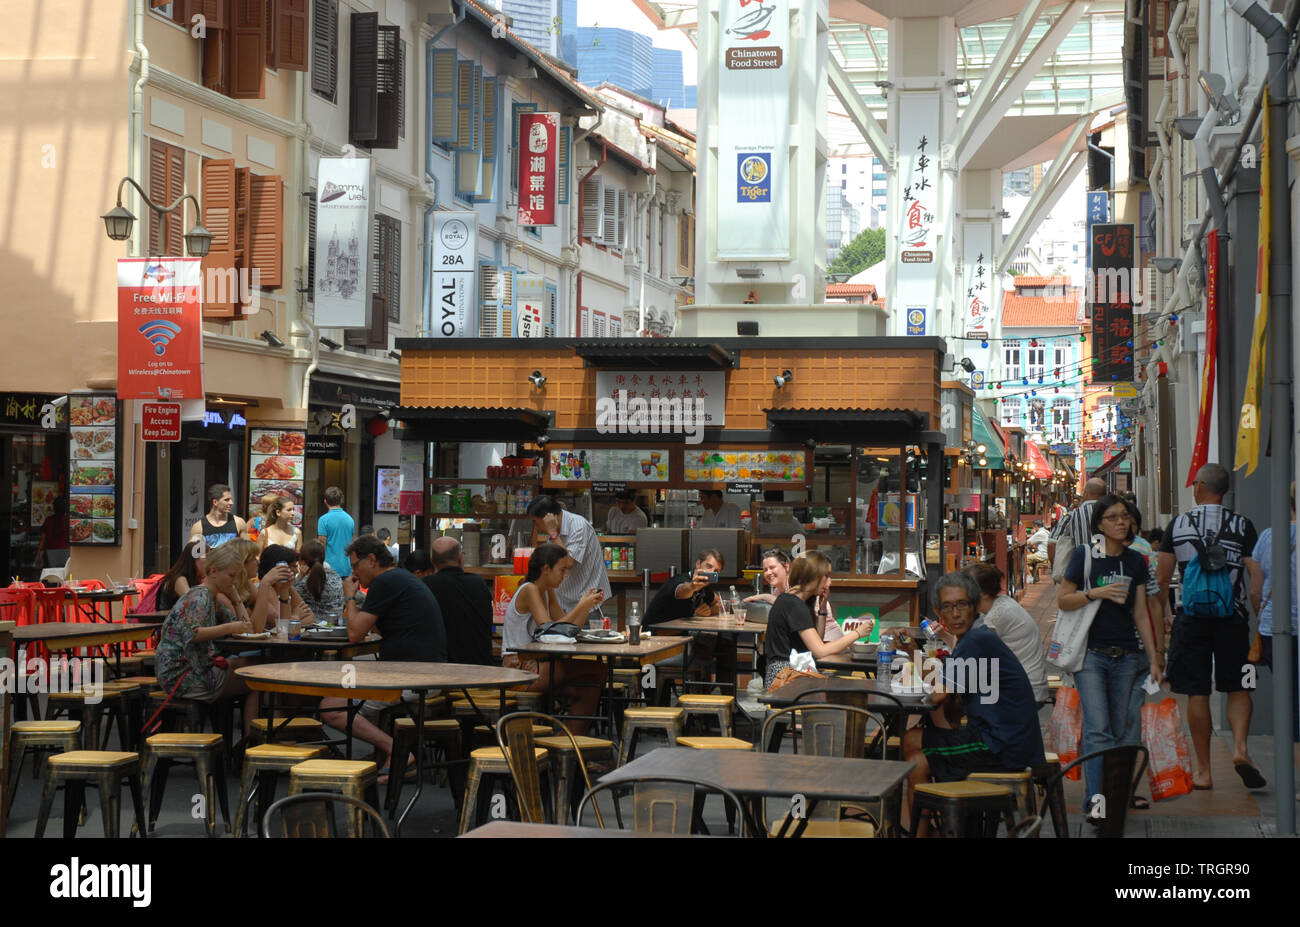 Food street, a vibrant, busy undercover area with people seated at  tables enjoying refreshments and food, Chinatown, Singapore Stock Photo